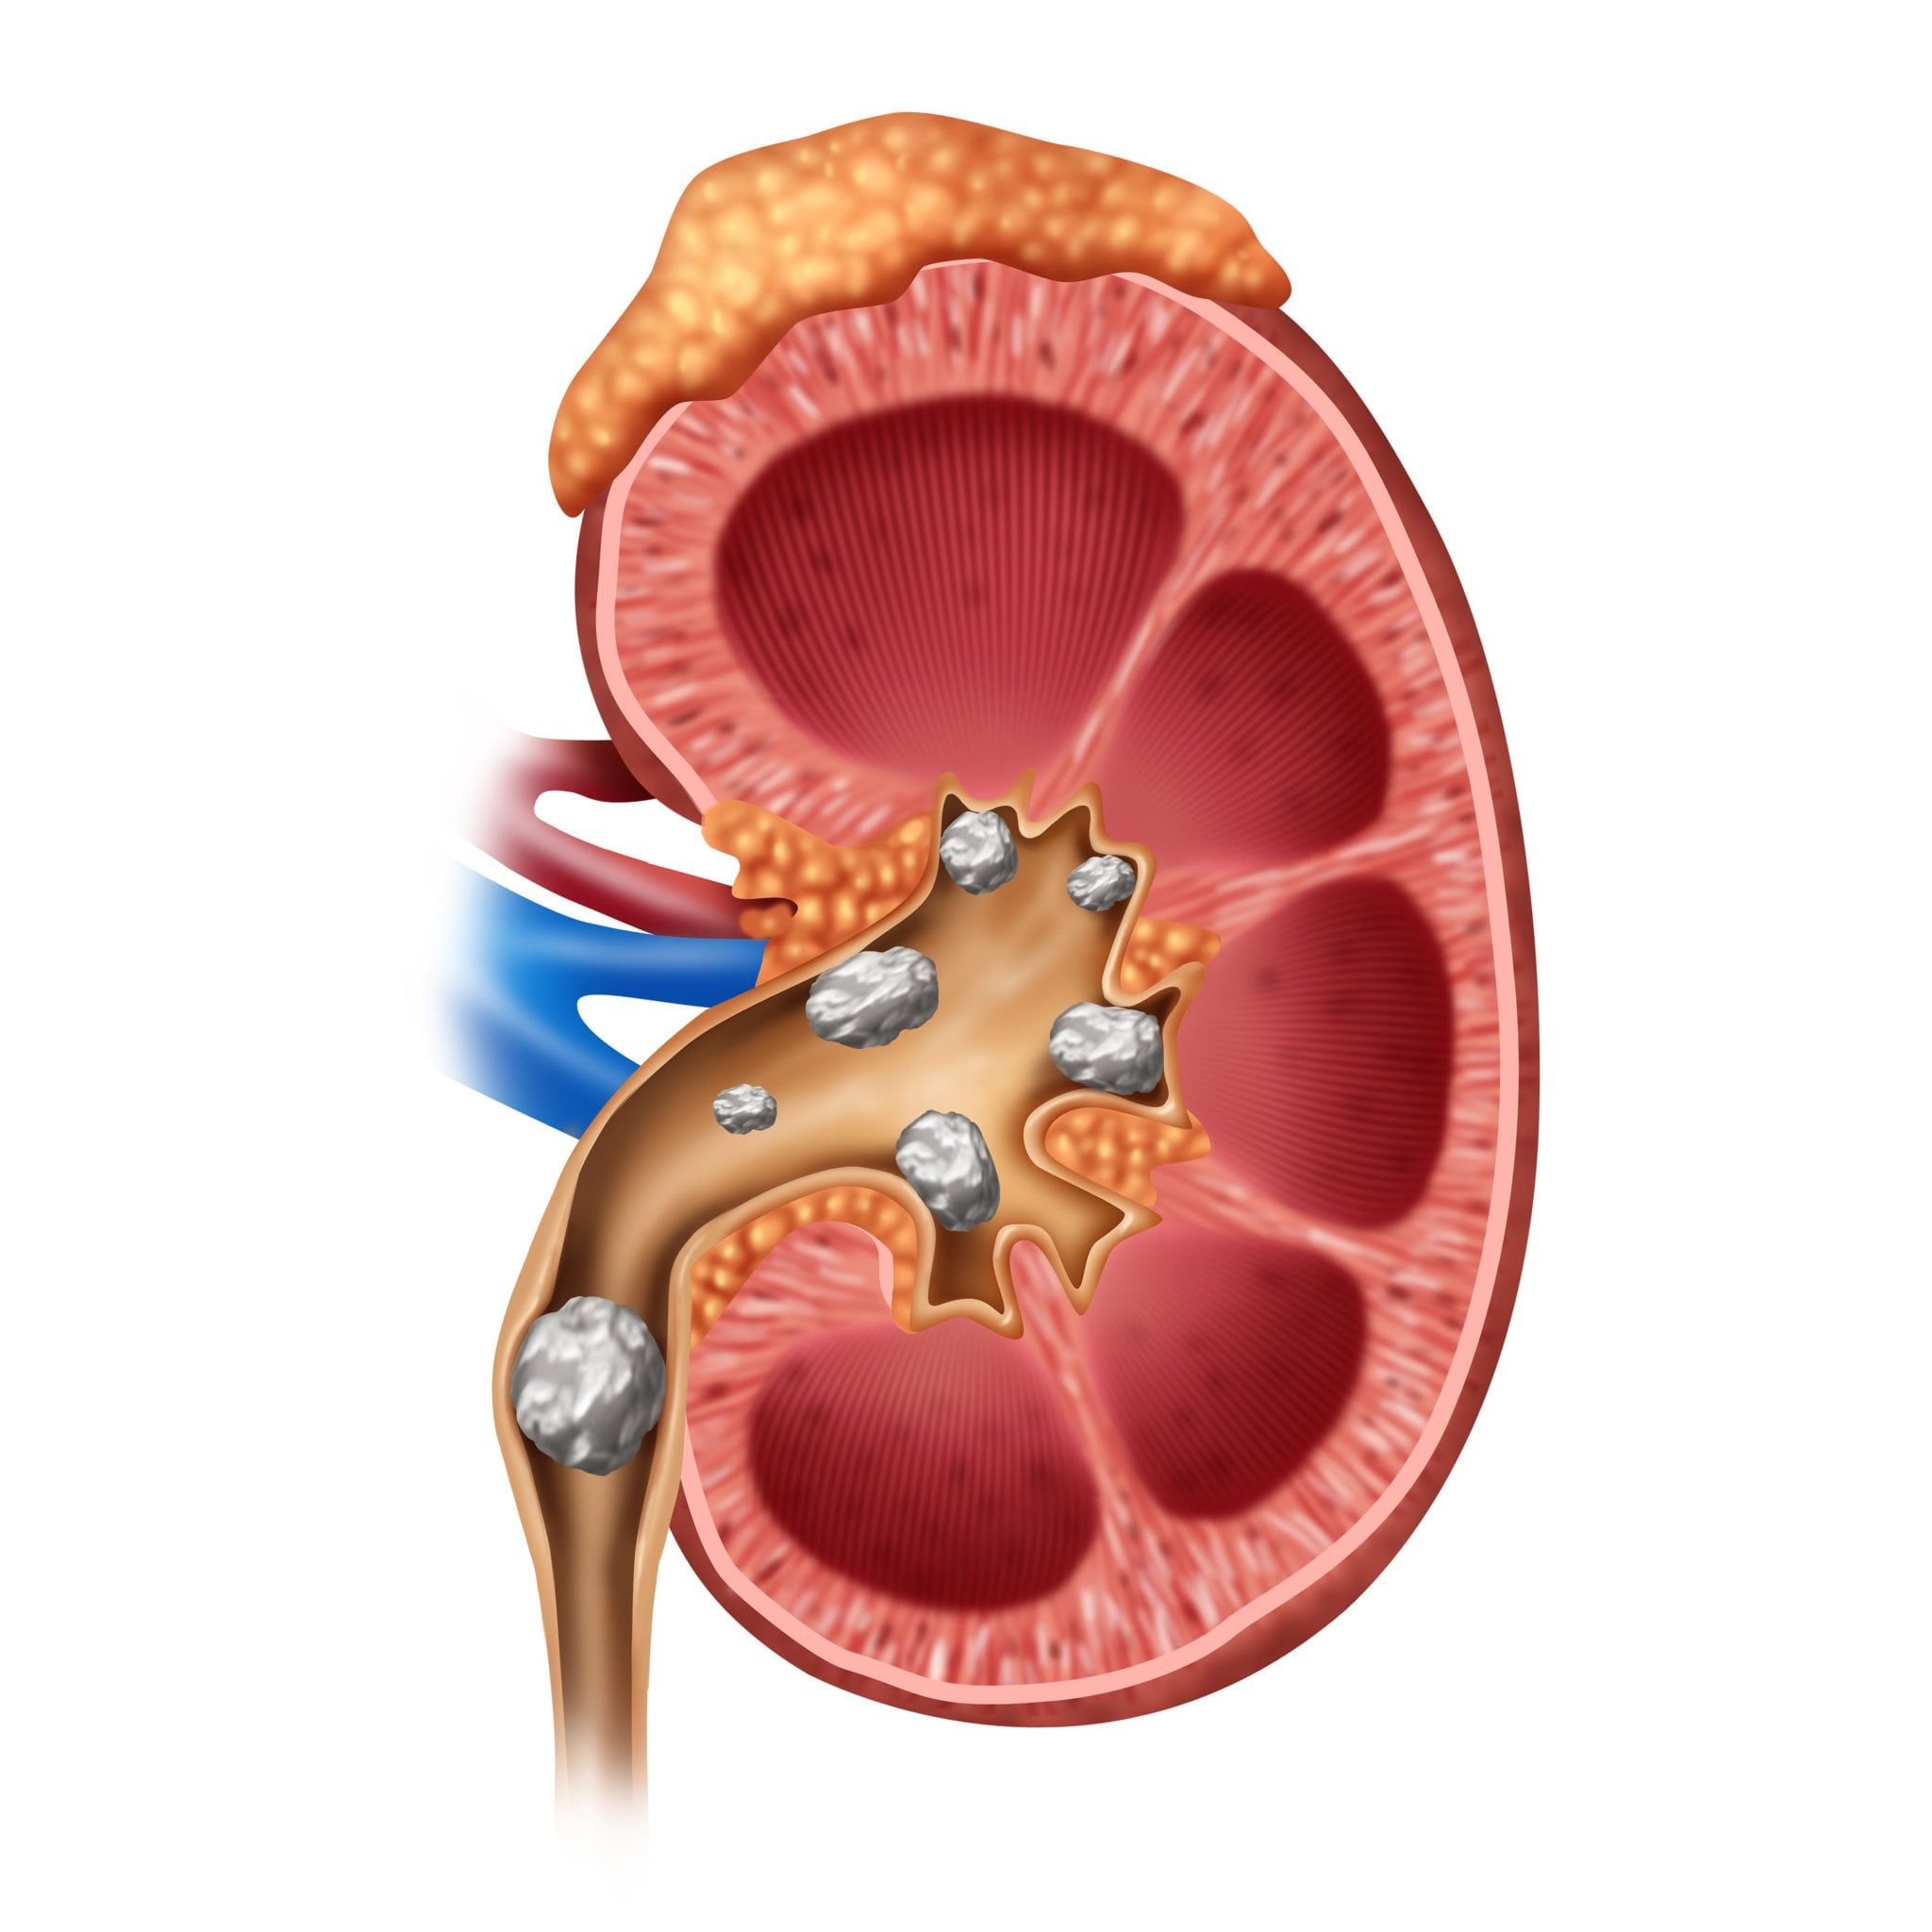 Medical Illustration of a Kidney with stones formed inside the kidney